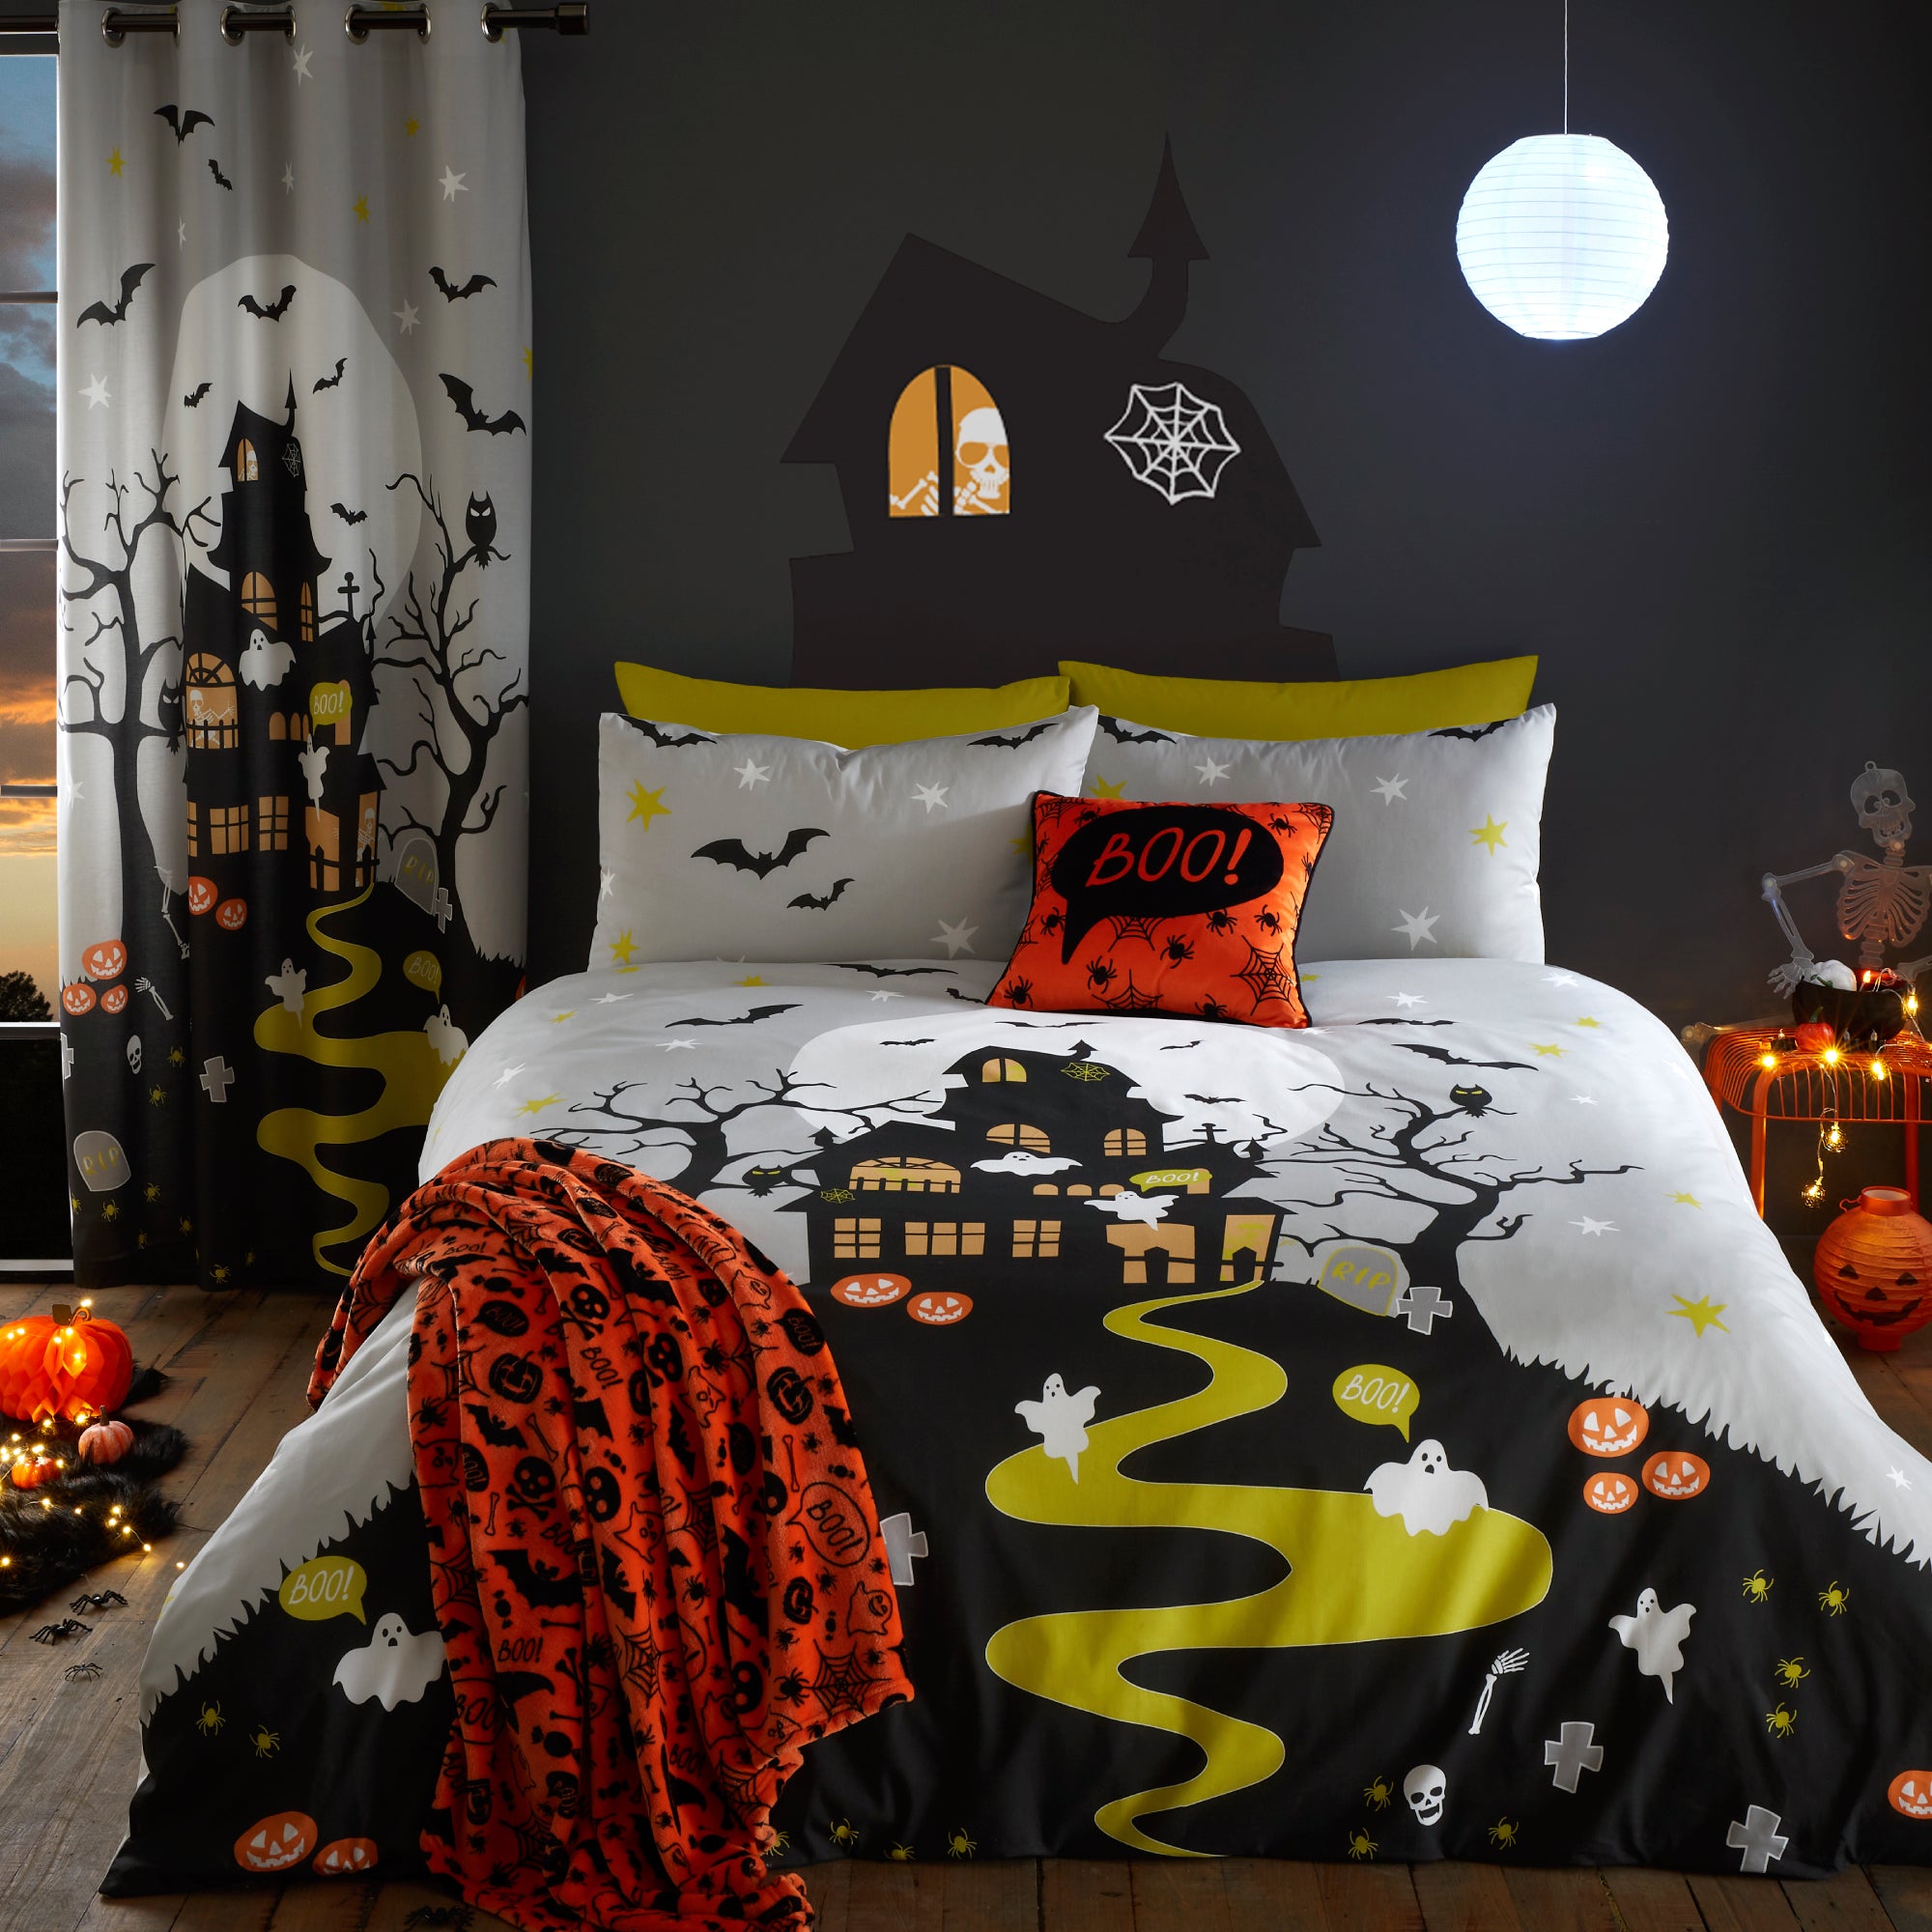 Duvet Cover Set Halloween Haunted House by Bedlam in Grey